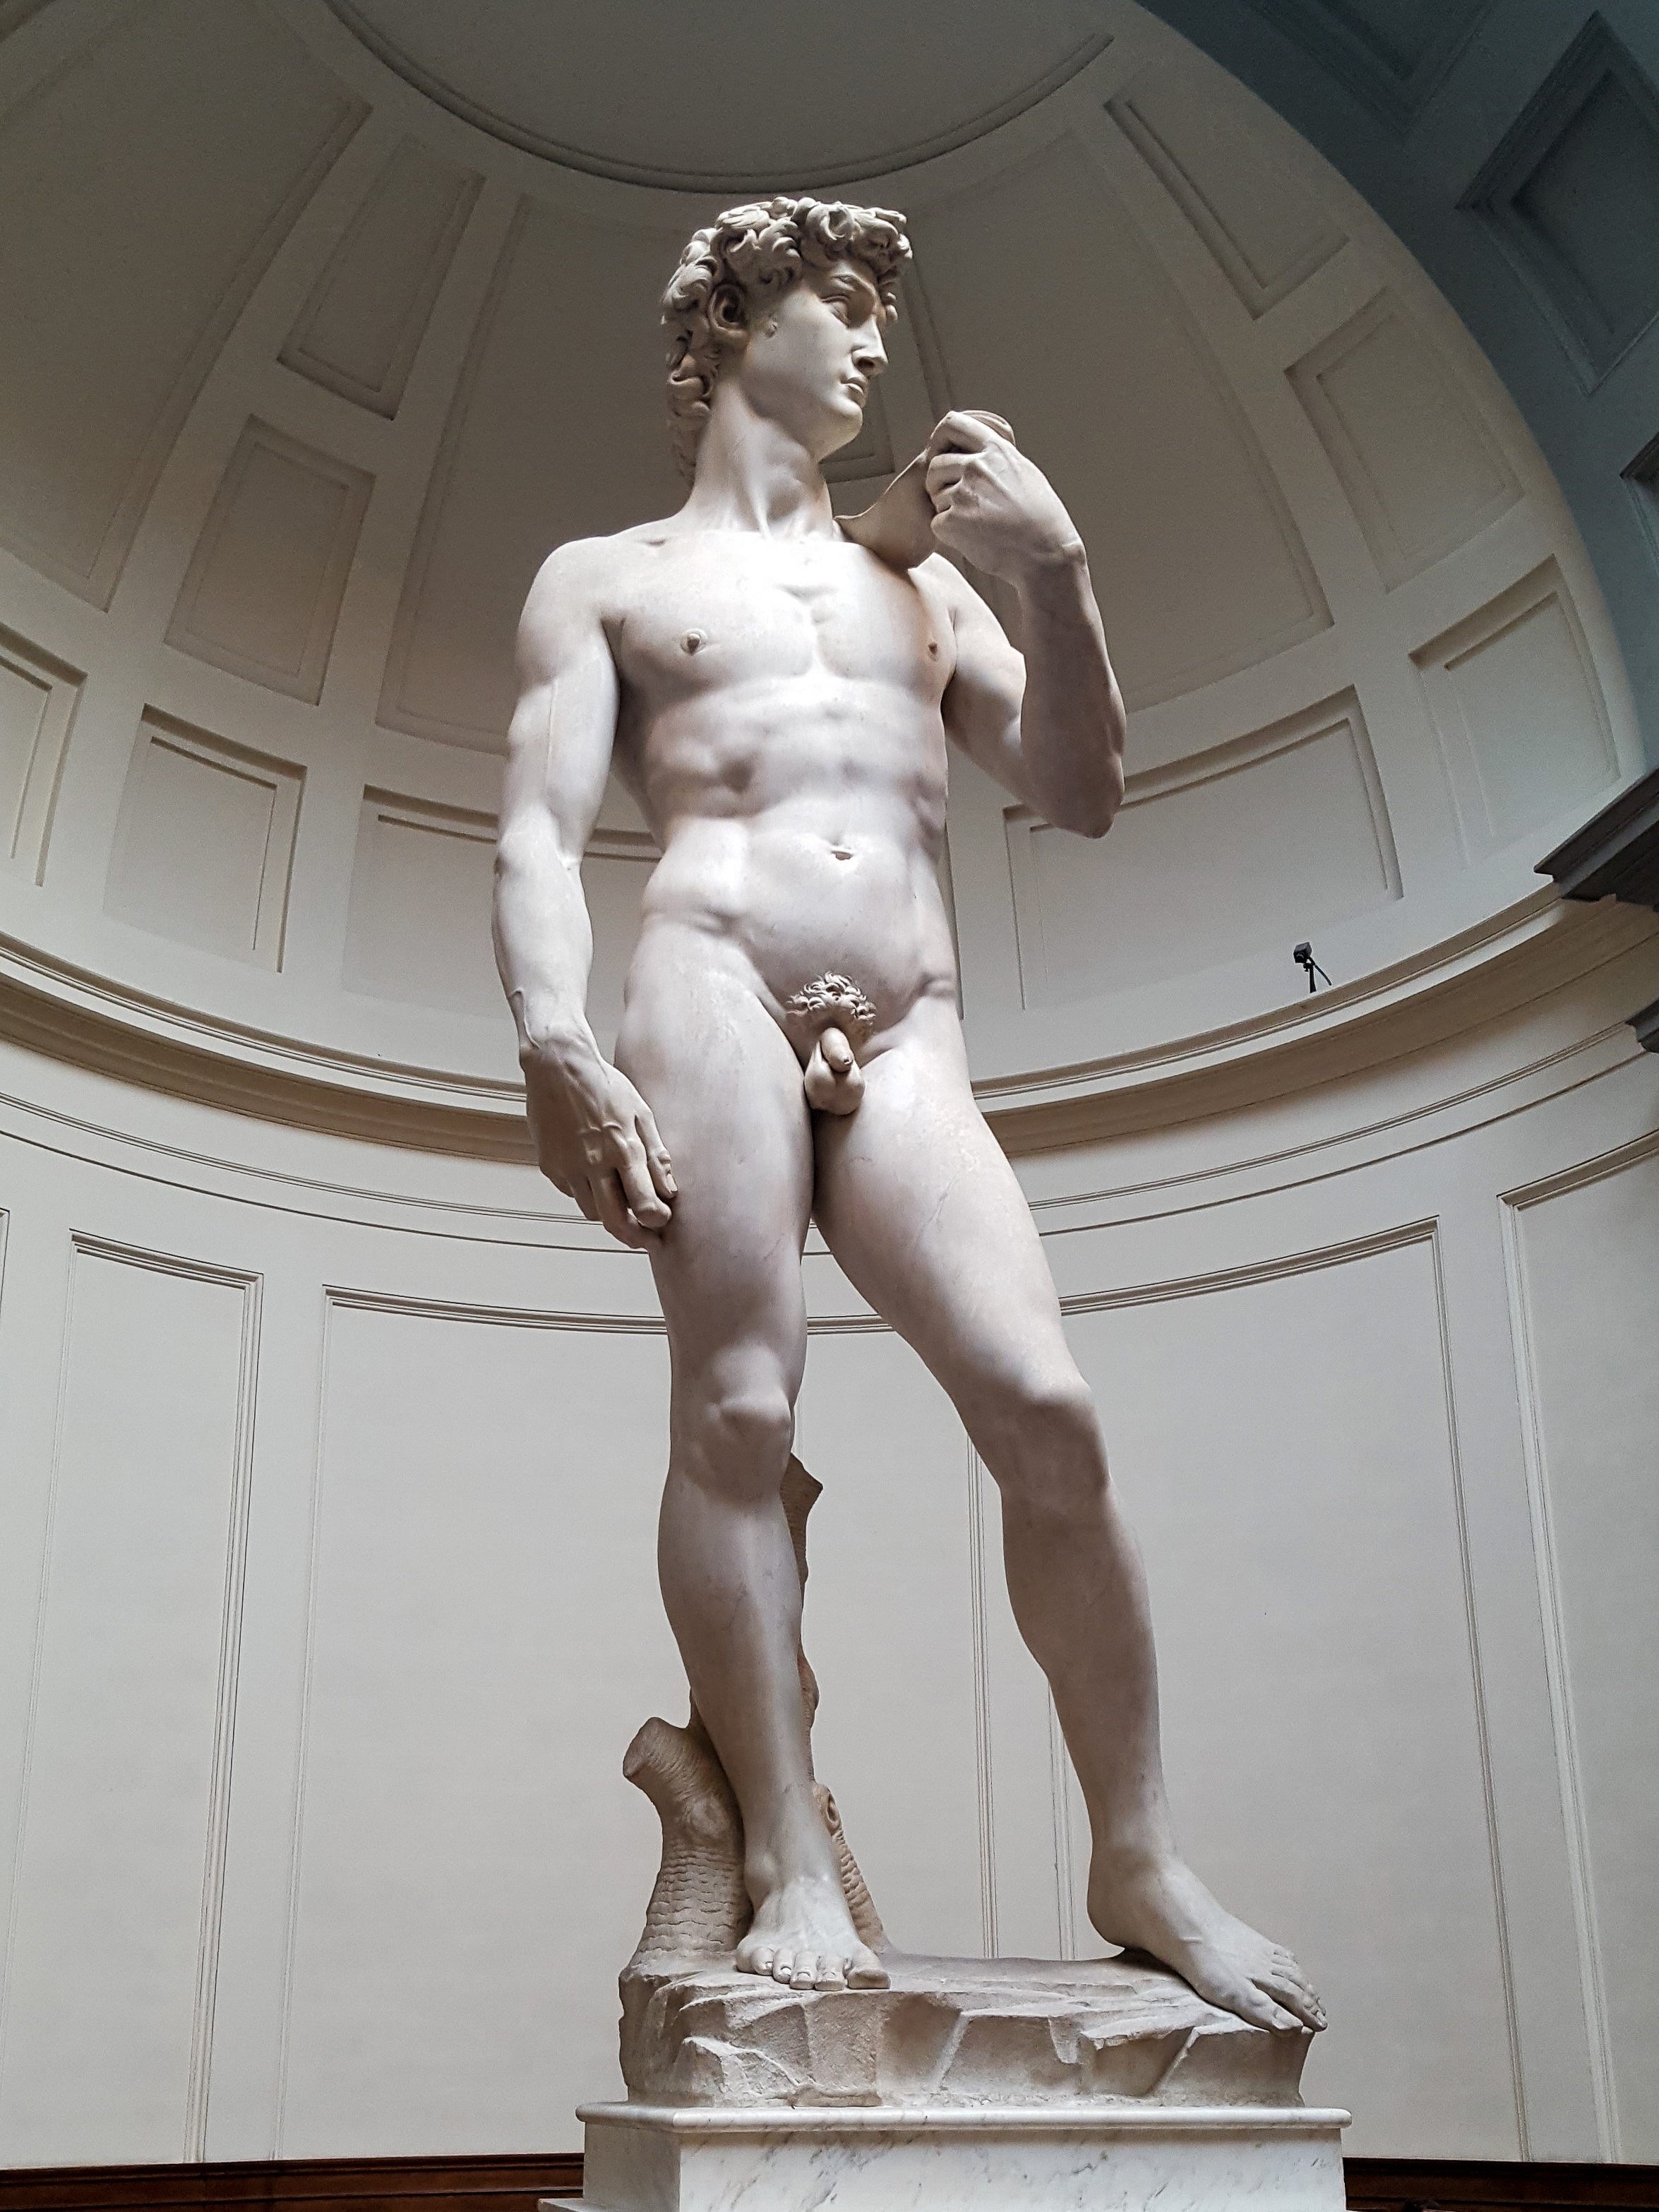 The David by Michelangelo